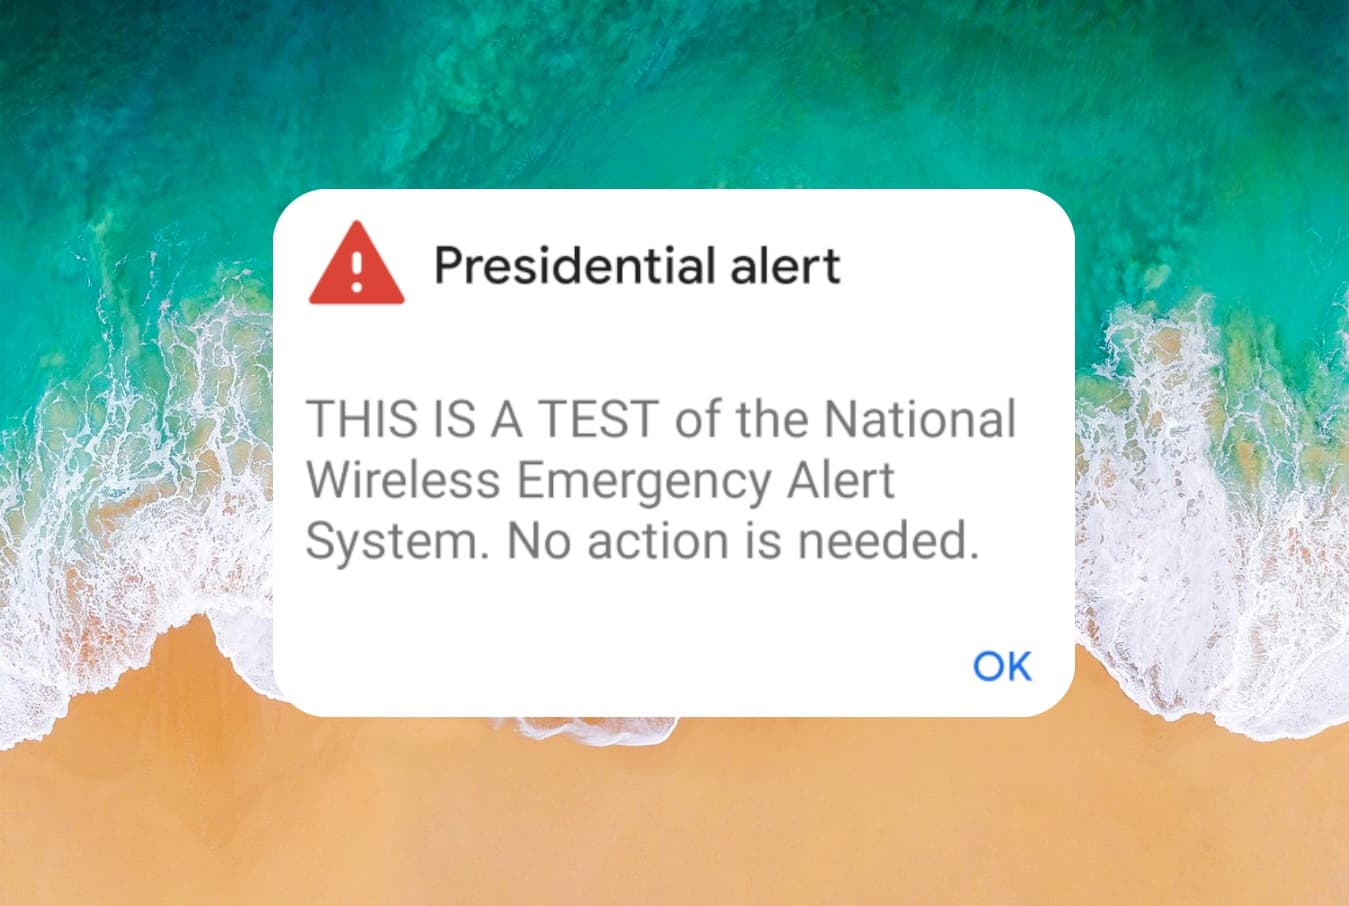 Researchers exploit LTE flaws to send 50,000 fake presidential alerts